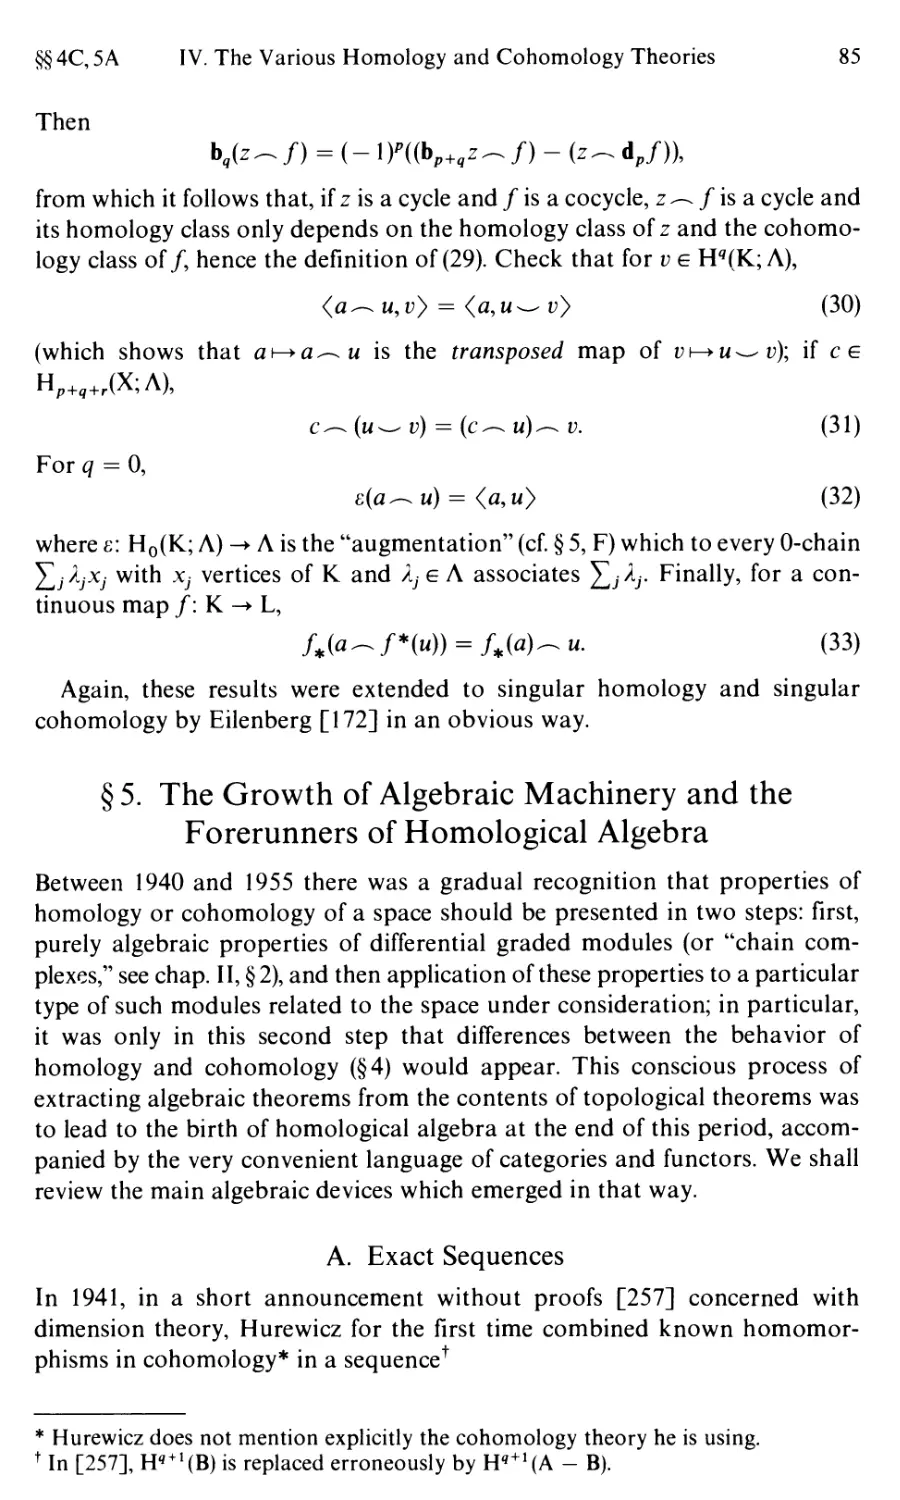 §5. The Growth of Algebraic Machinery and the Forerunners of Homological Algebra